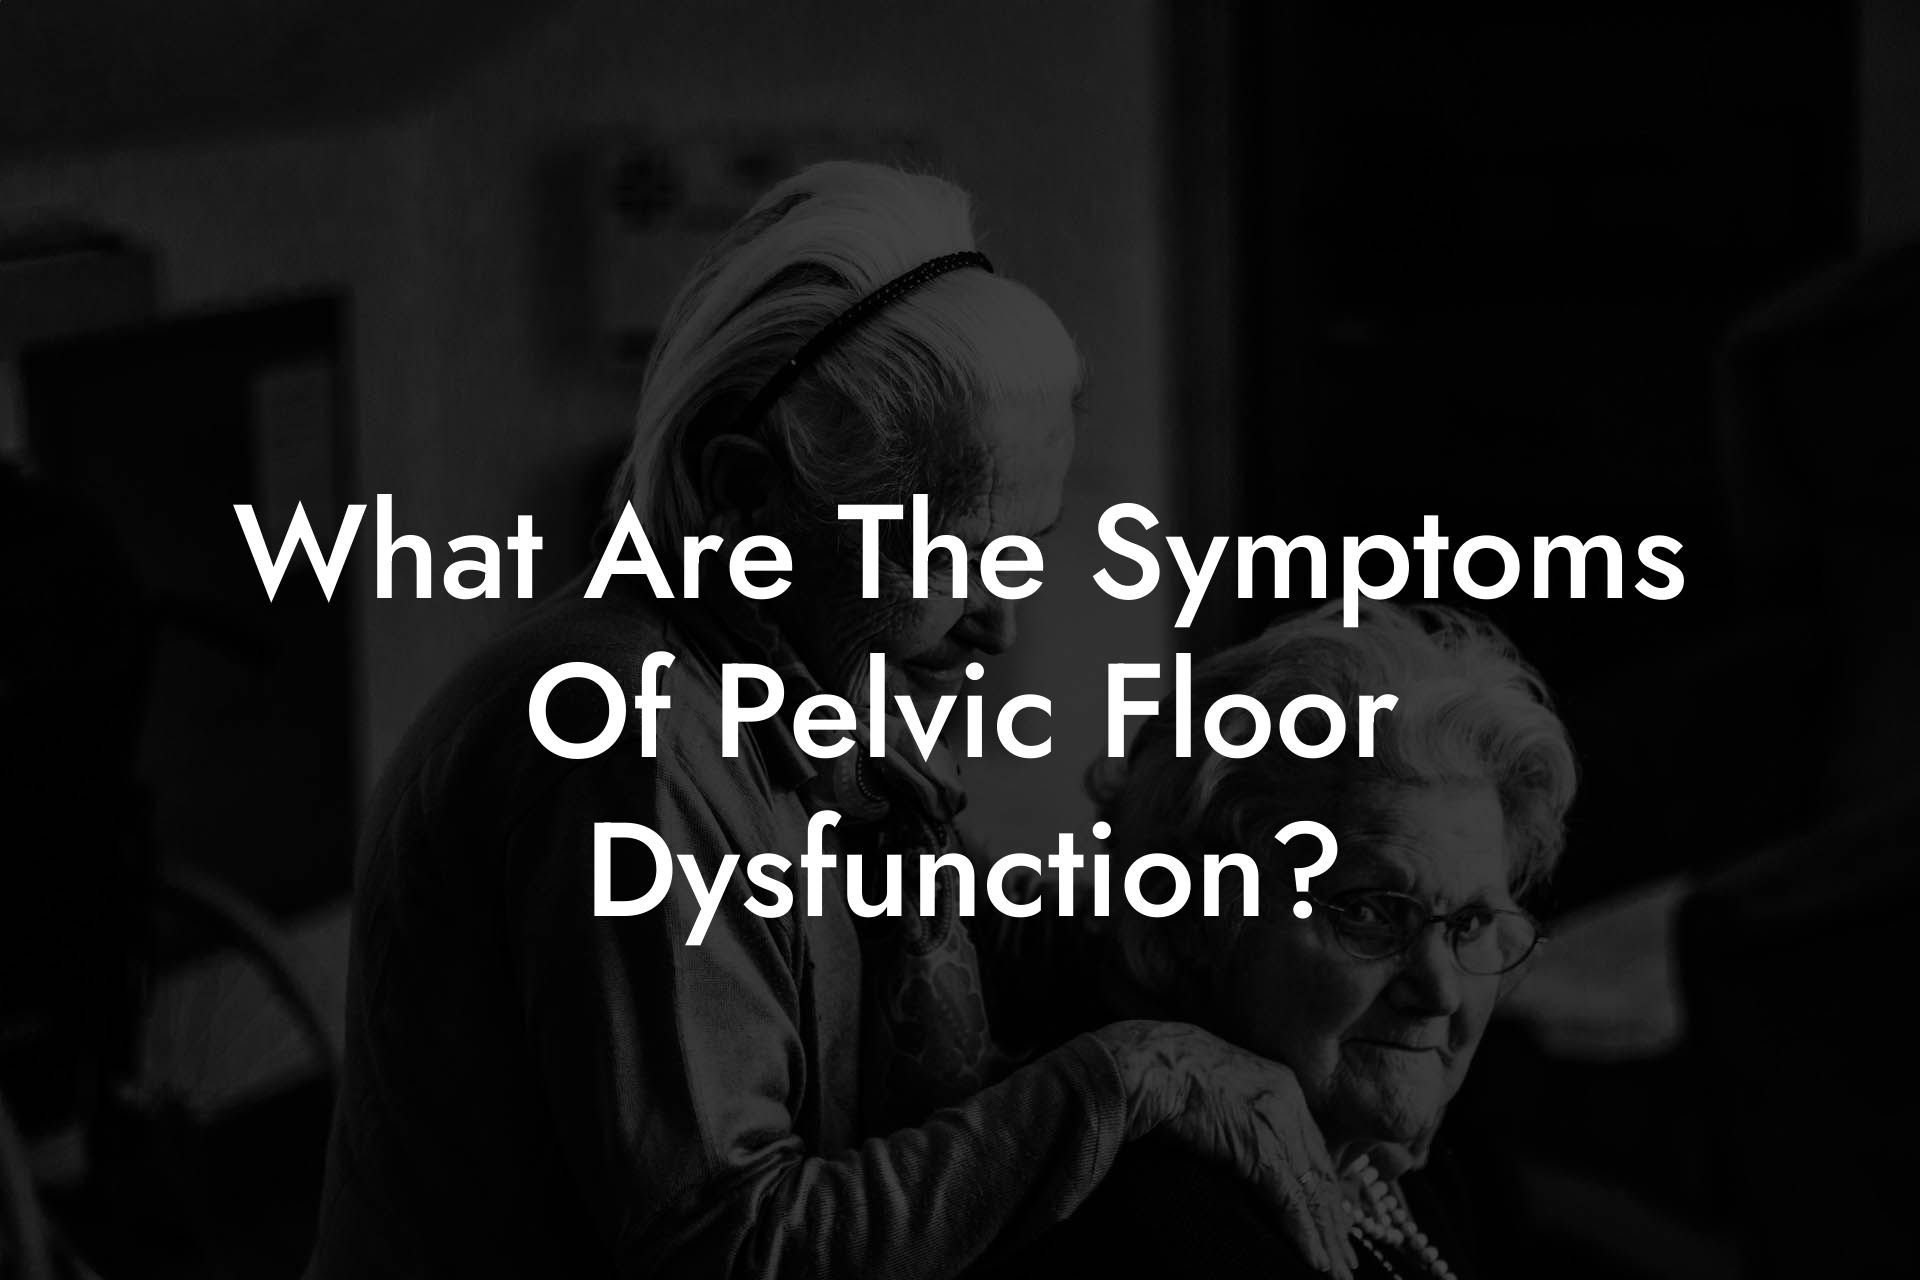 What Are The Symptoms Of Pelvic Floor Dysfunction?